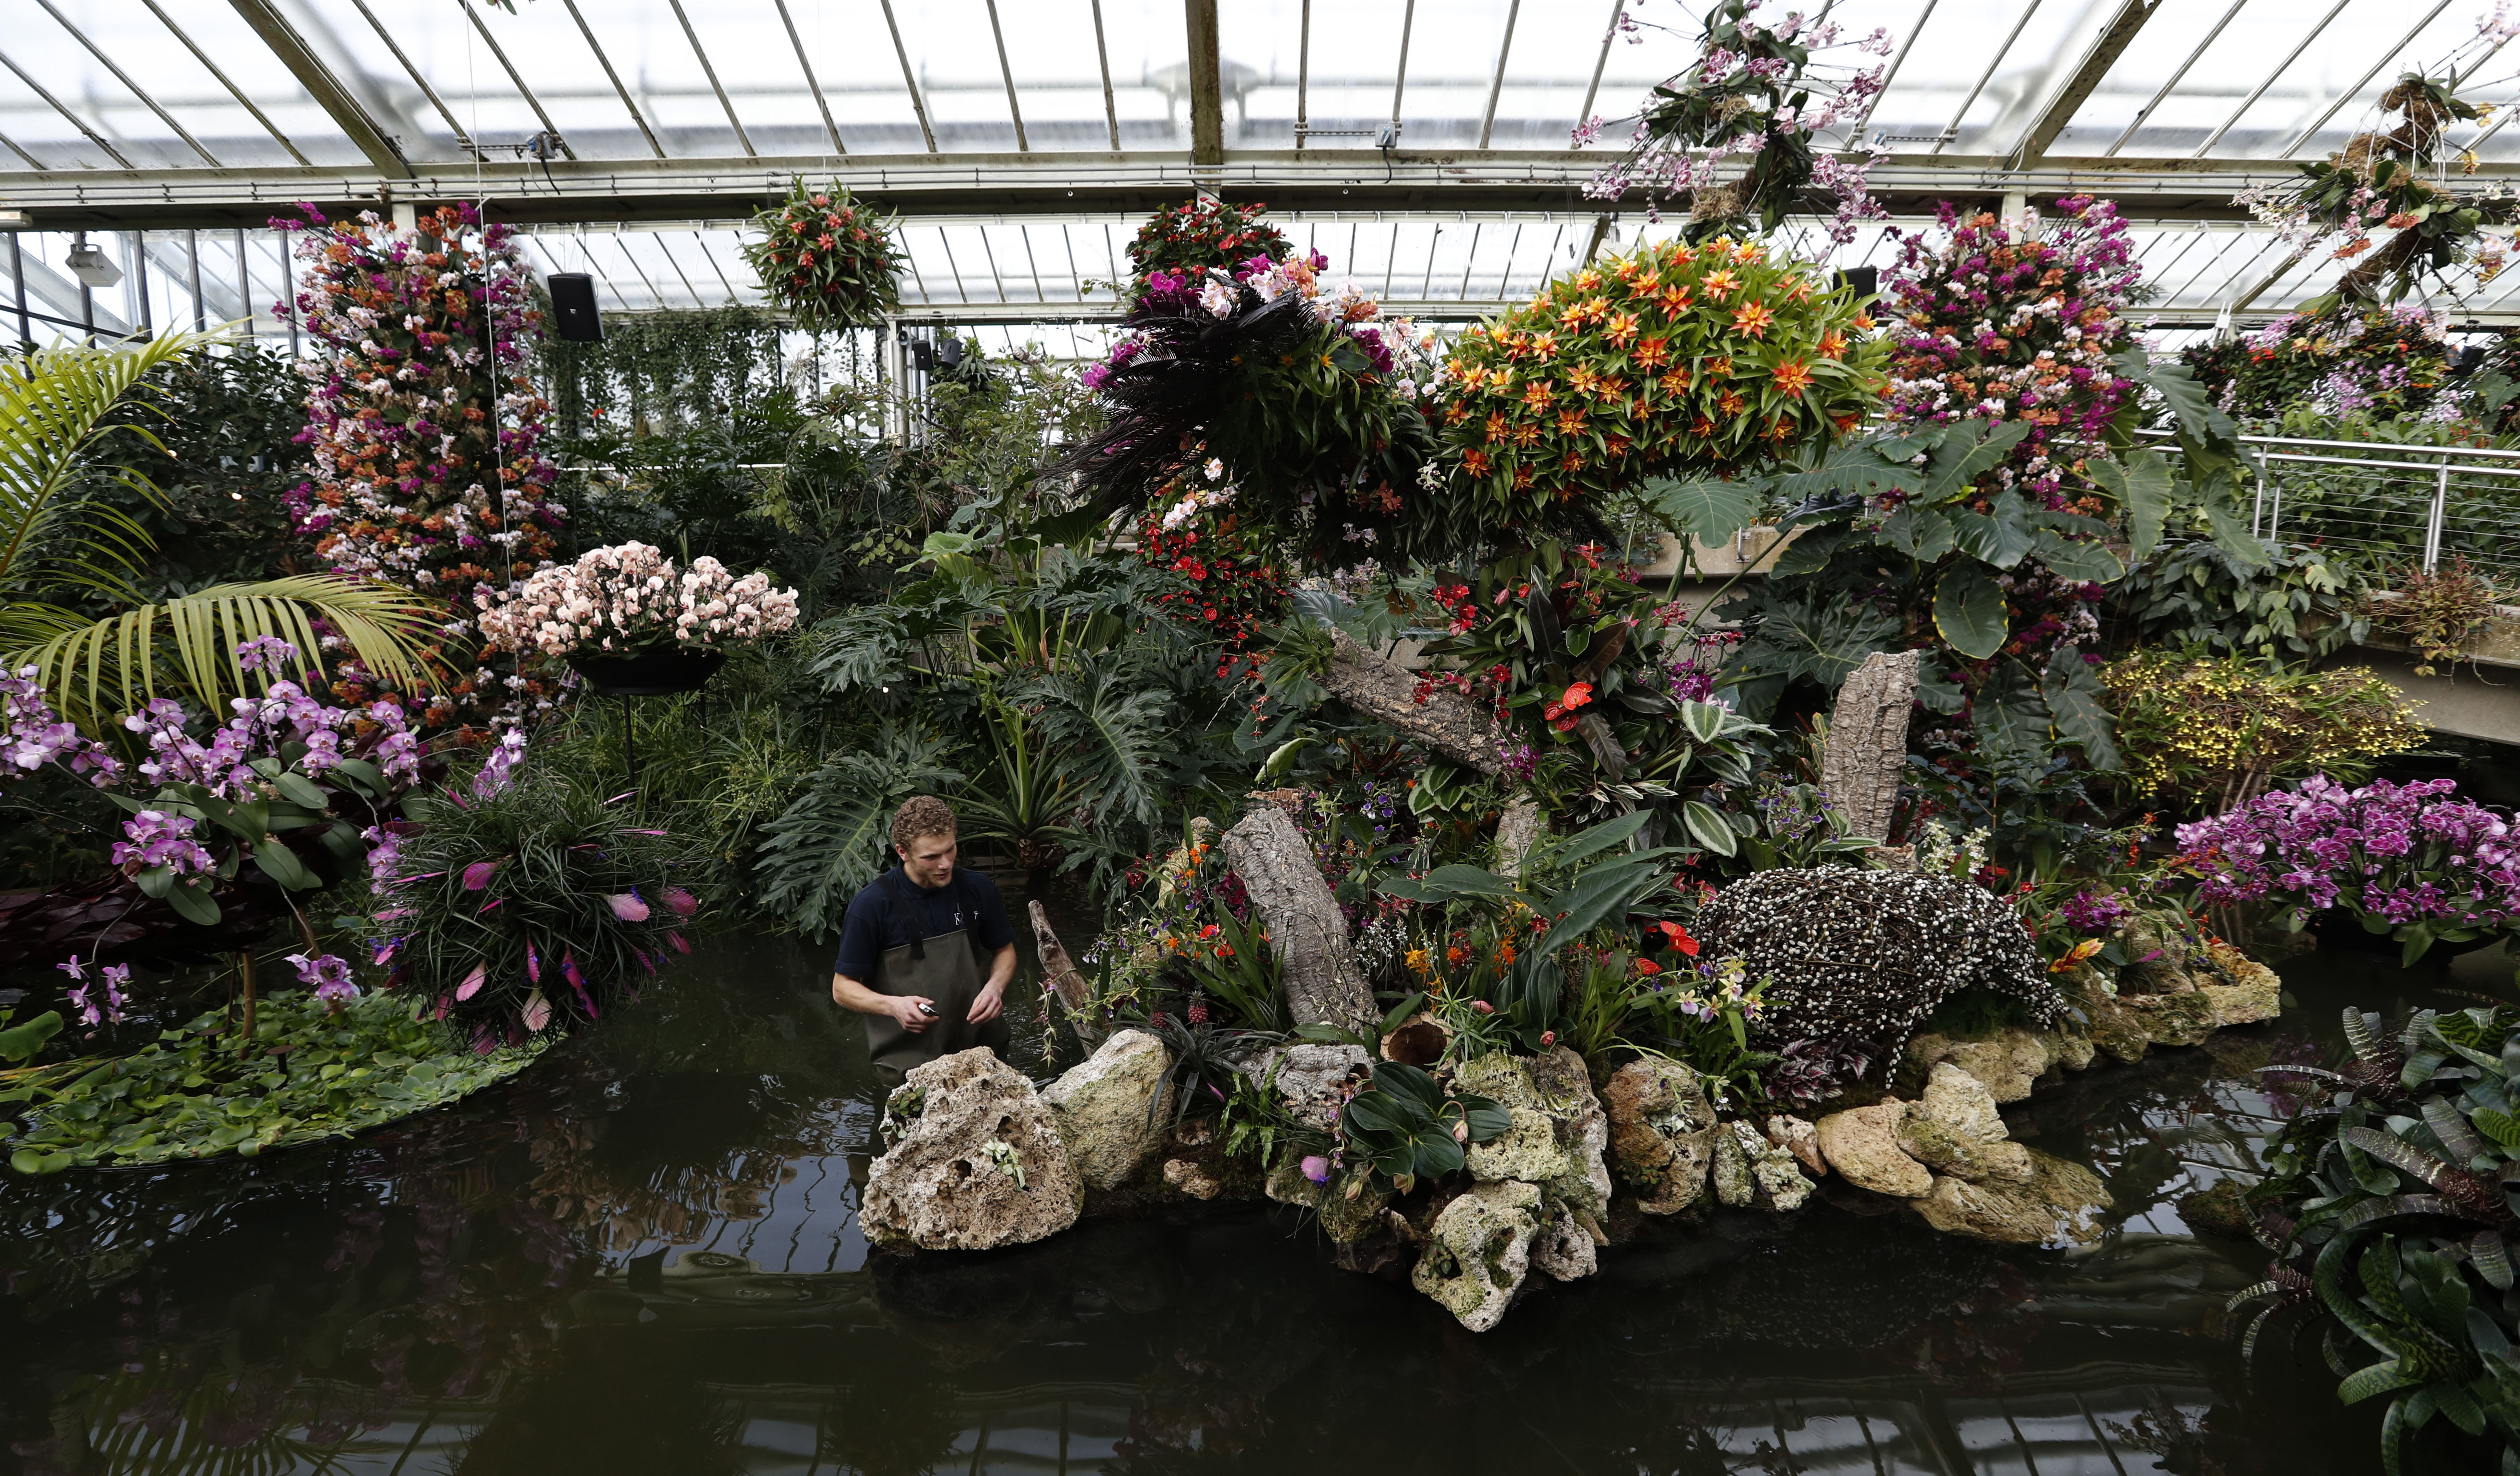 Tom Forshaw, a horticulture apprentice, attends to a display of orchids at the Kew Gardens Orchid Festival during a press preview at Kew Gardens in London, Thursday, Feb. 7, 2019. The display of some 6,200 orchids took 30 days to complete, with the central display showing off the biodiversity of Colombia which is home to more species of orchid than anywhere else in the world. The display opens to the public on Feb.9. (AP Photo/Alastair Grant)